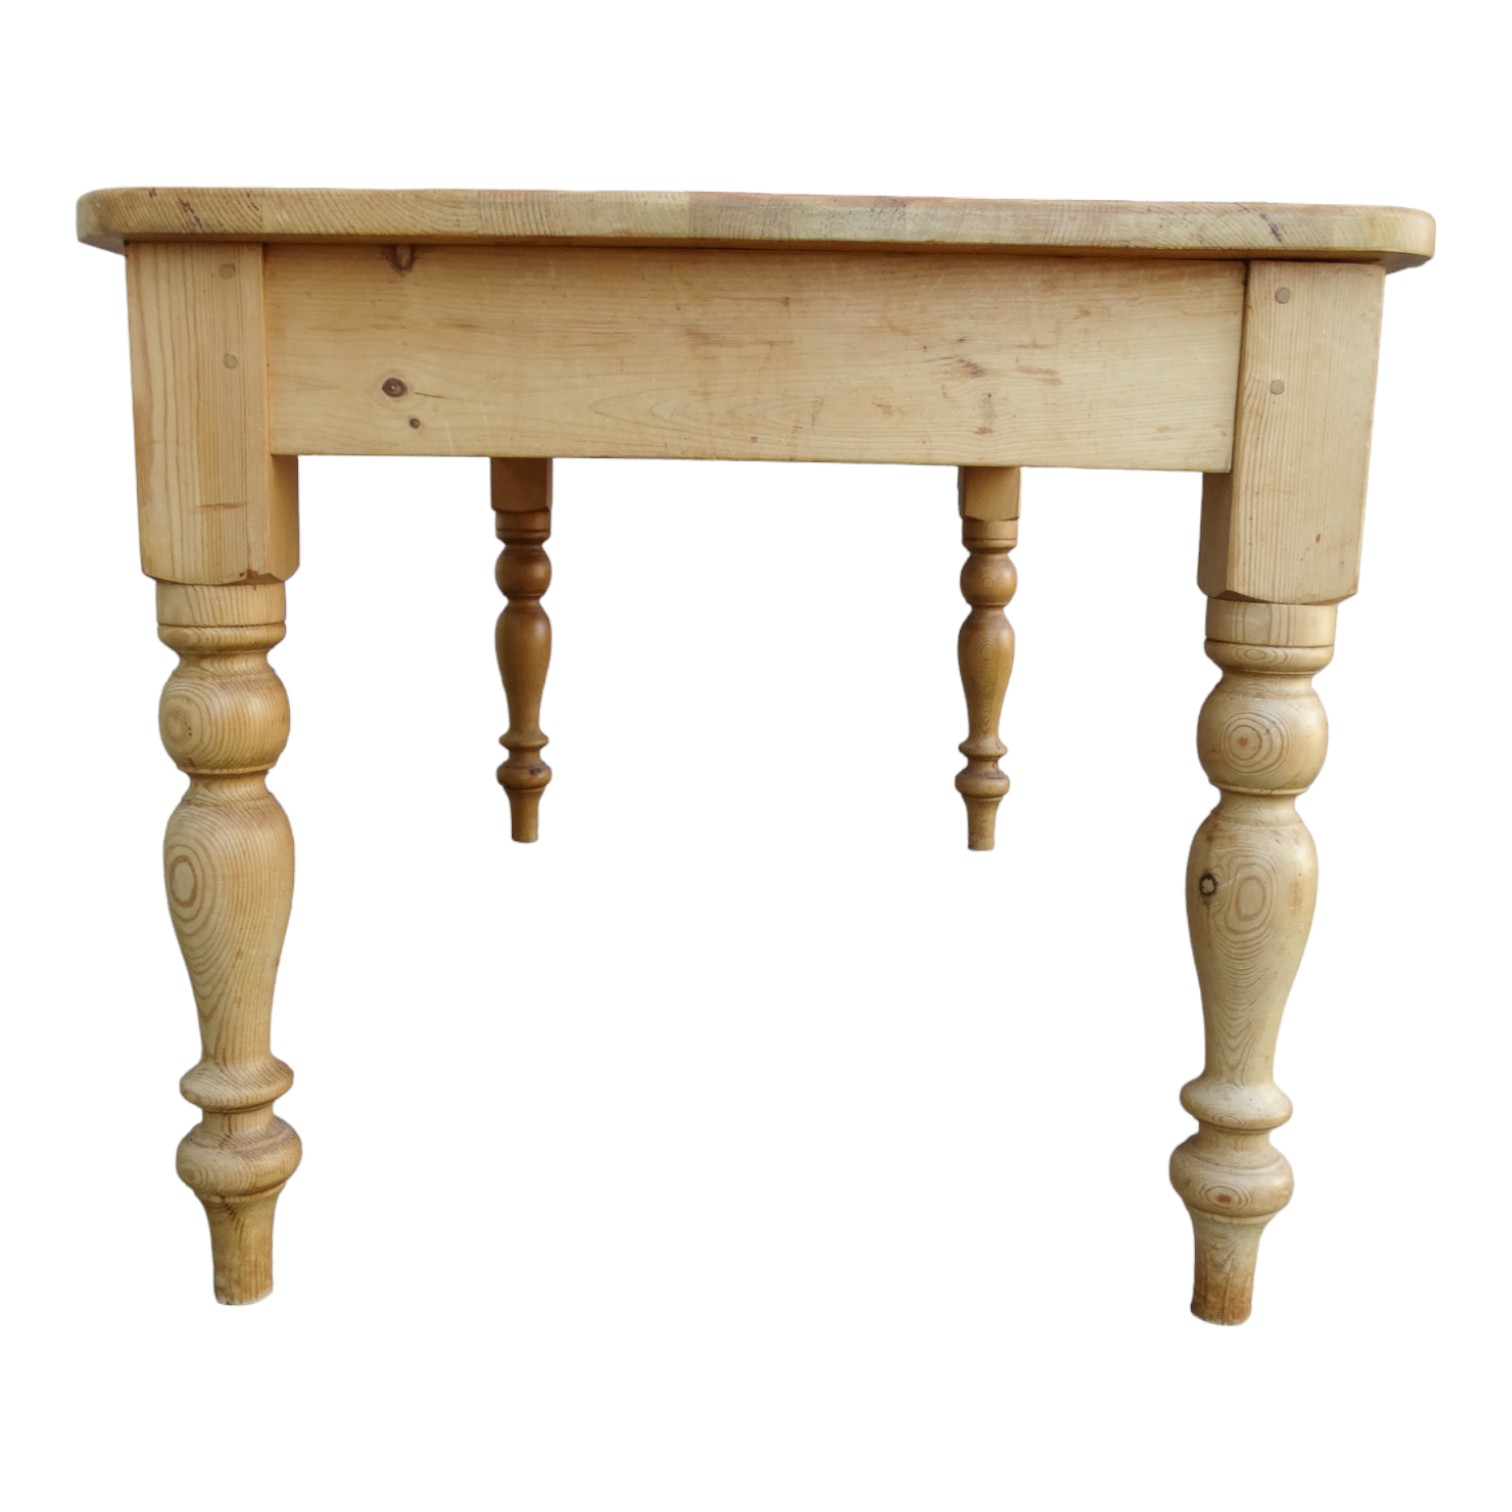 A 20th century pine kitchen table - with a rectangular plank top and raised on turned legs, 182 x 90 - Image 3 of 6